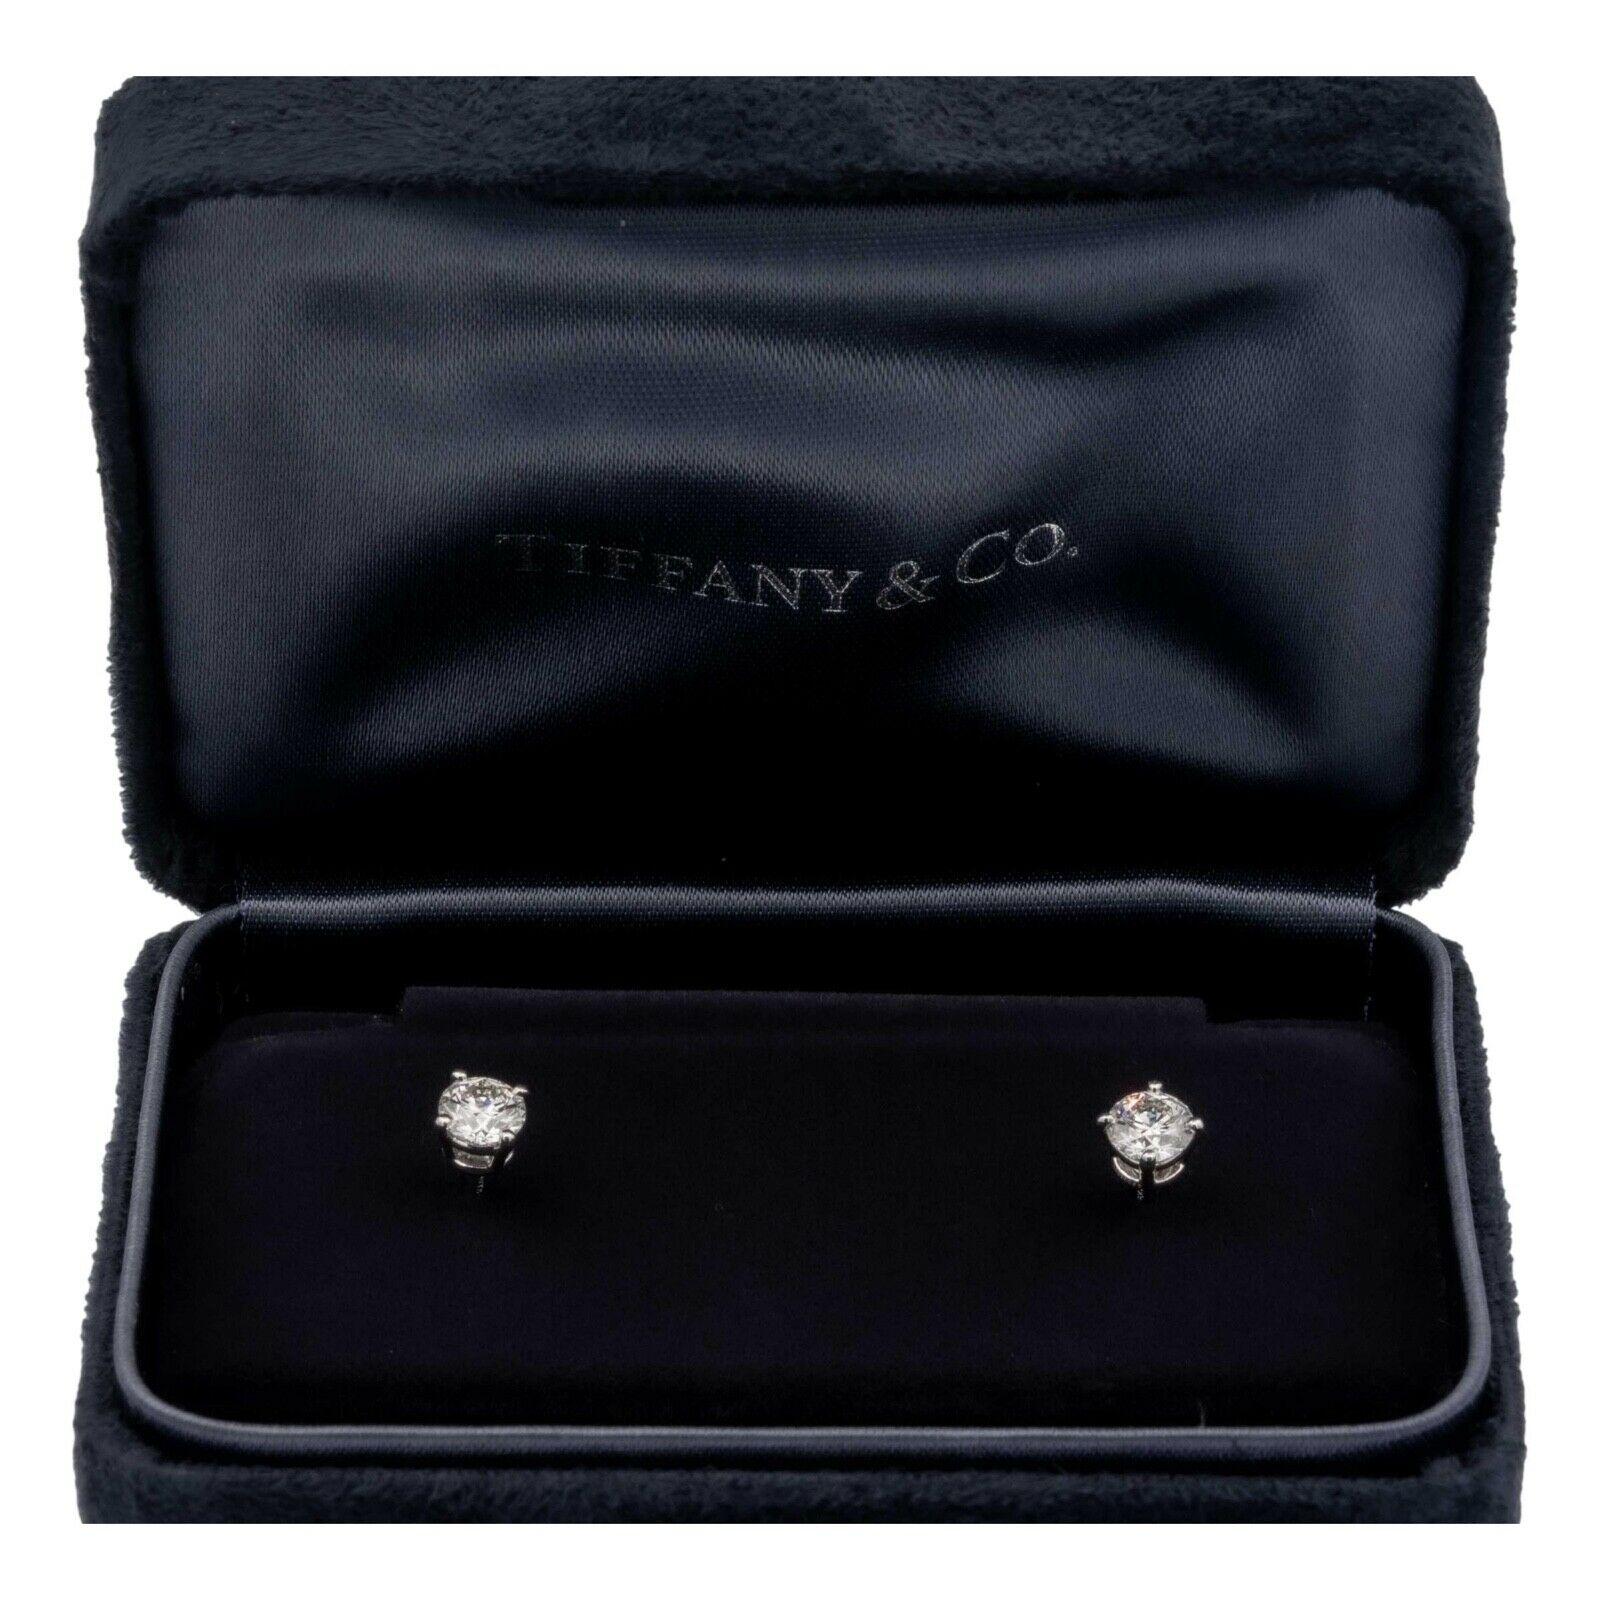 Pair of Tiffany & Co. Diamond Stud earrings finely crafted in a Platinum 4 prong basket setting featuring two perfectly matched round brilliant cut diamonds weighing 0.90 carats total weight. One round brilliant diamond weighs 0.45 carats graded H